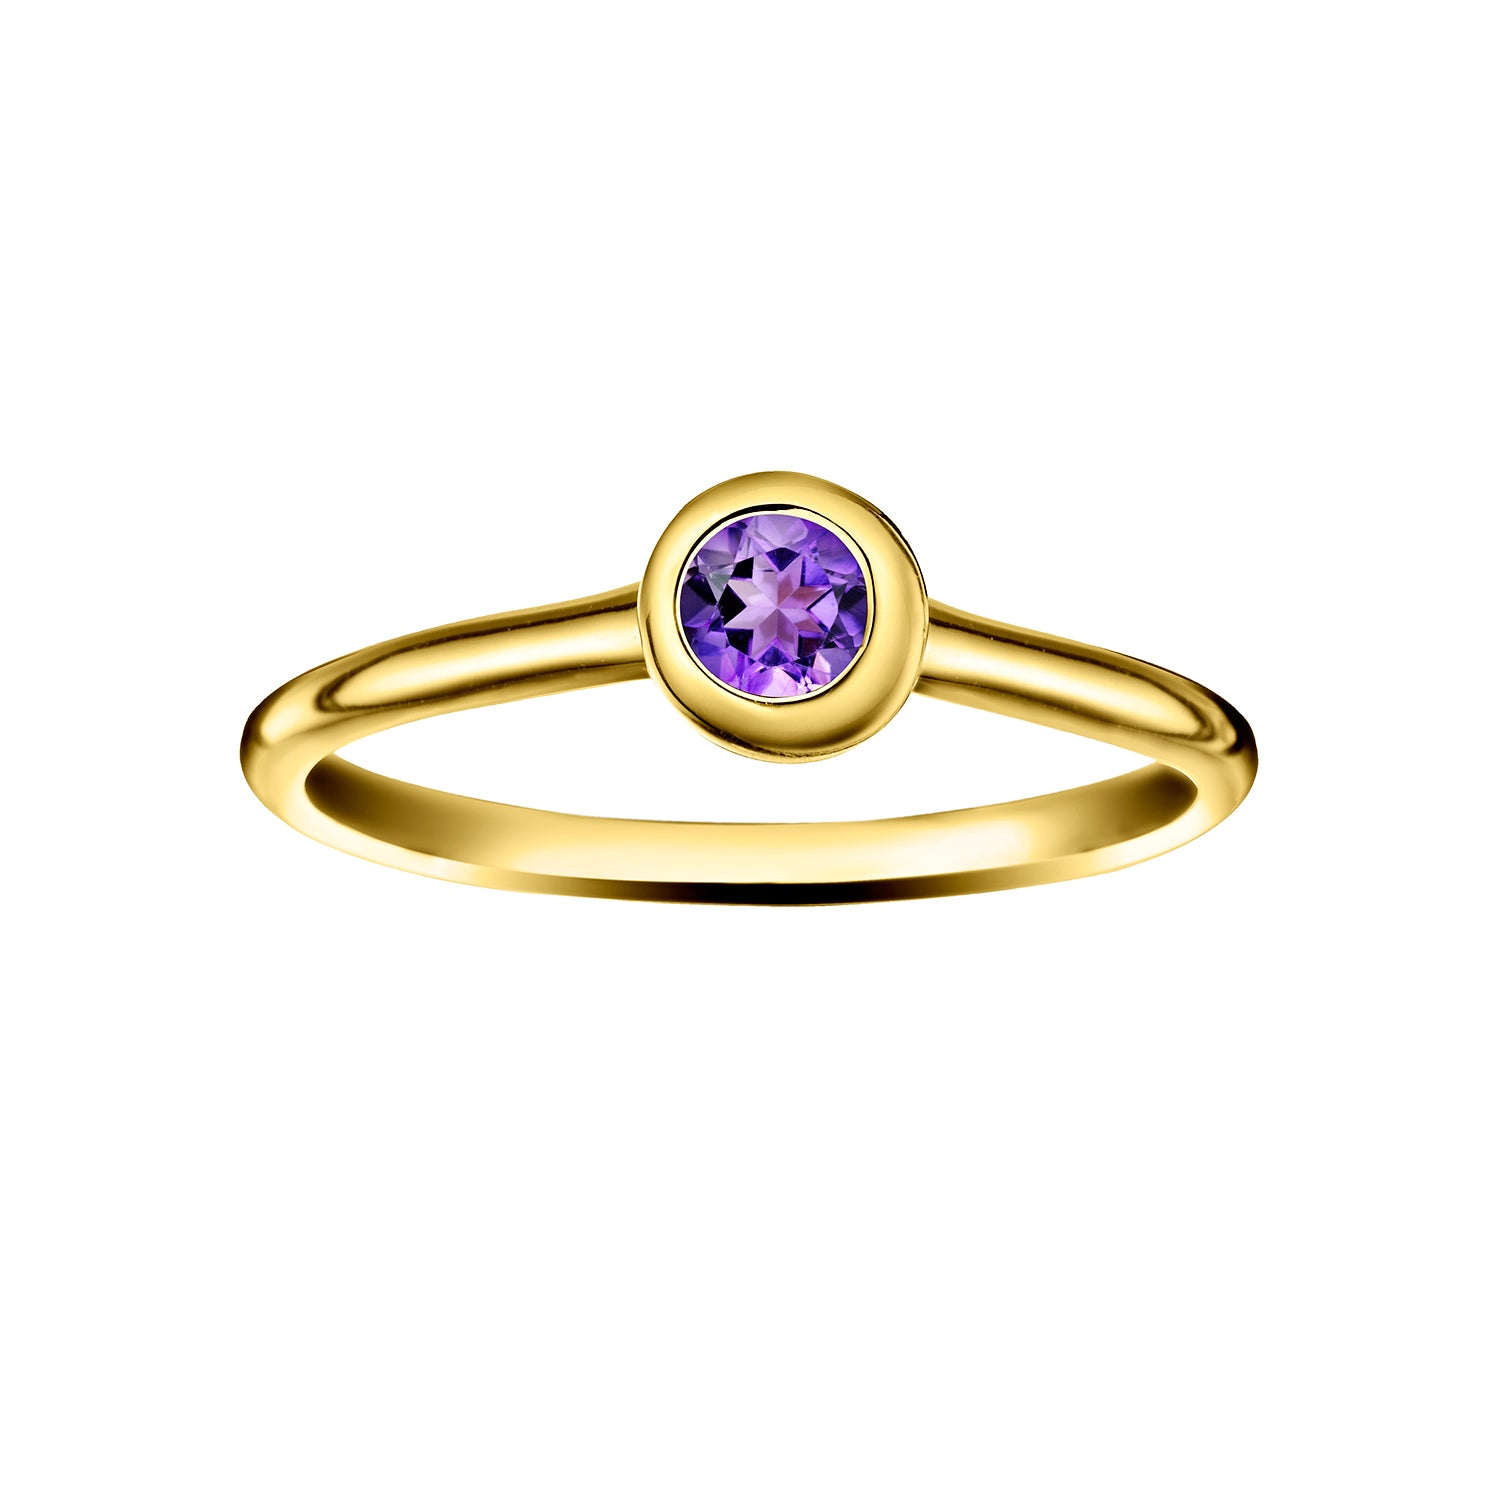 Polished Gold Vermeil Crescent Moon Stacking Birthstone Rings - February / Amethyst